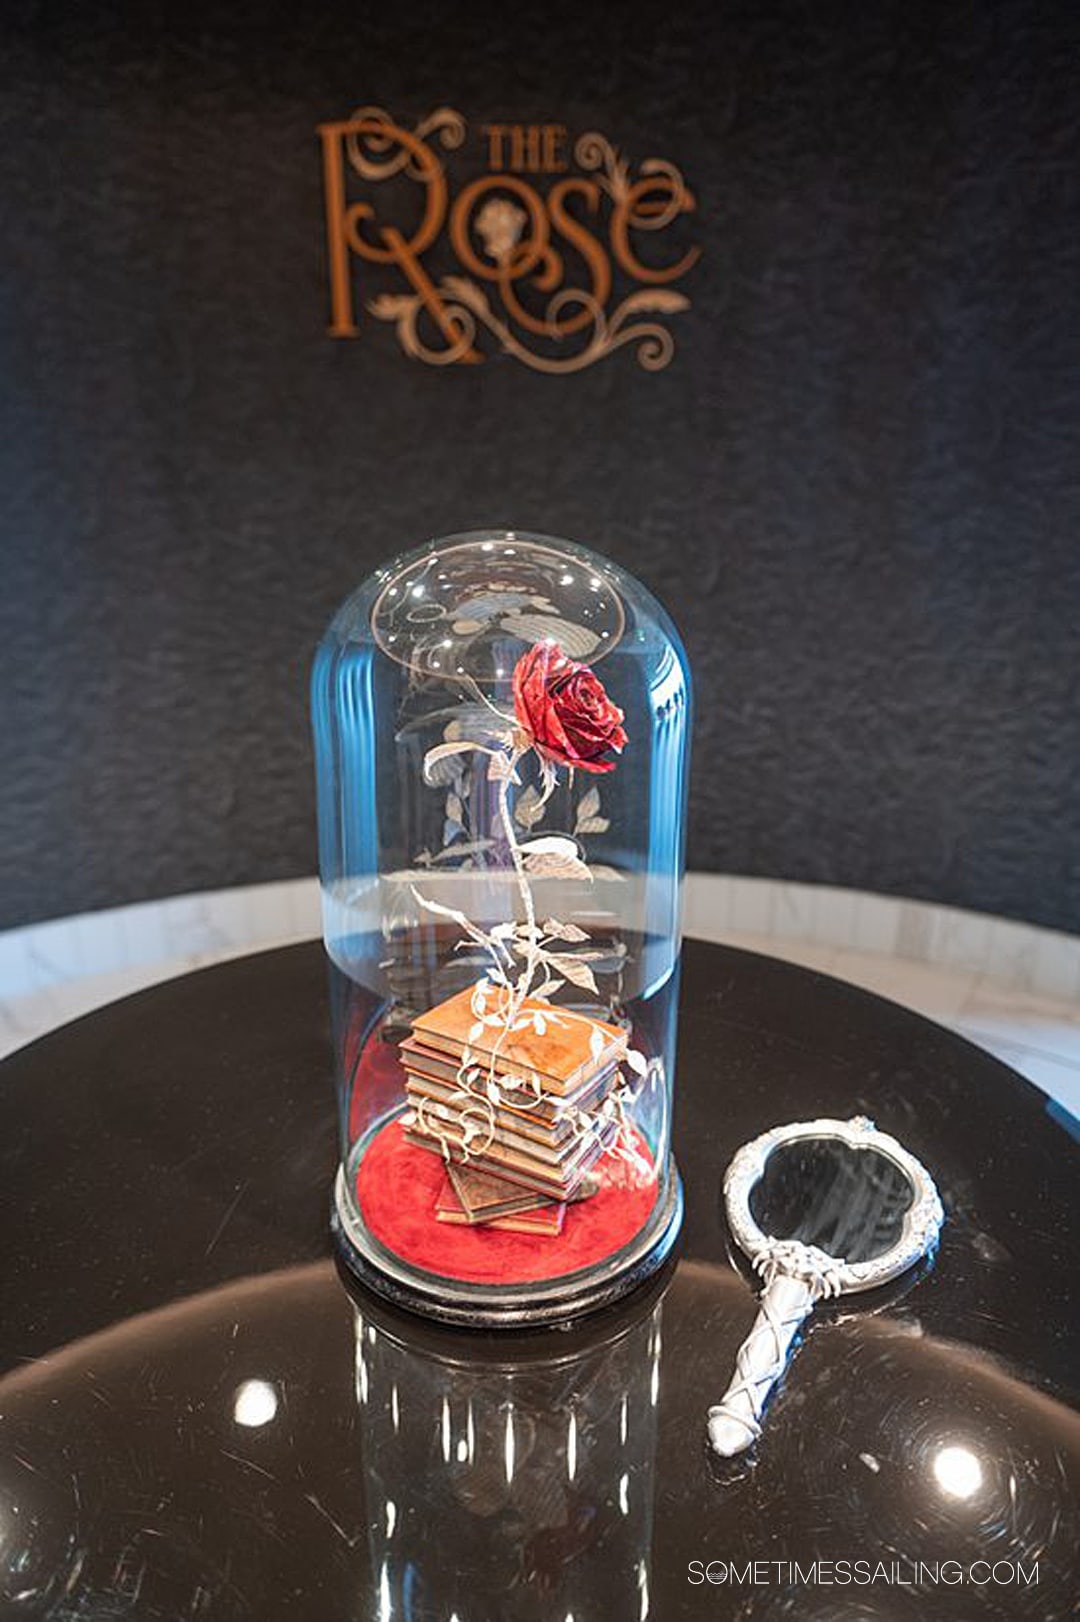 Entrance to The Rose bar on Disney Wish, with a glass encased rose on a black table, with a mirror next to it.